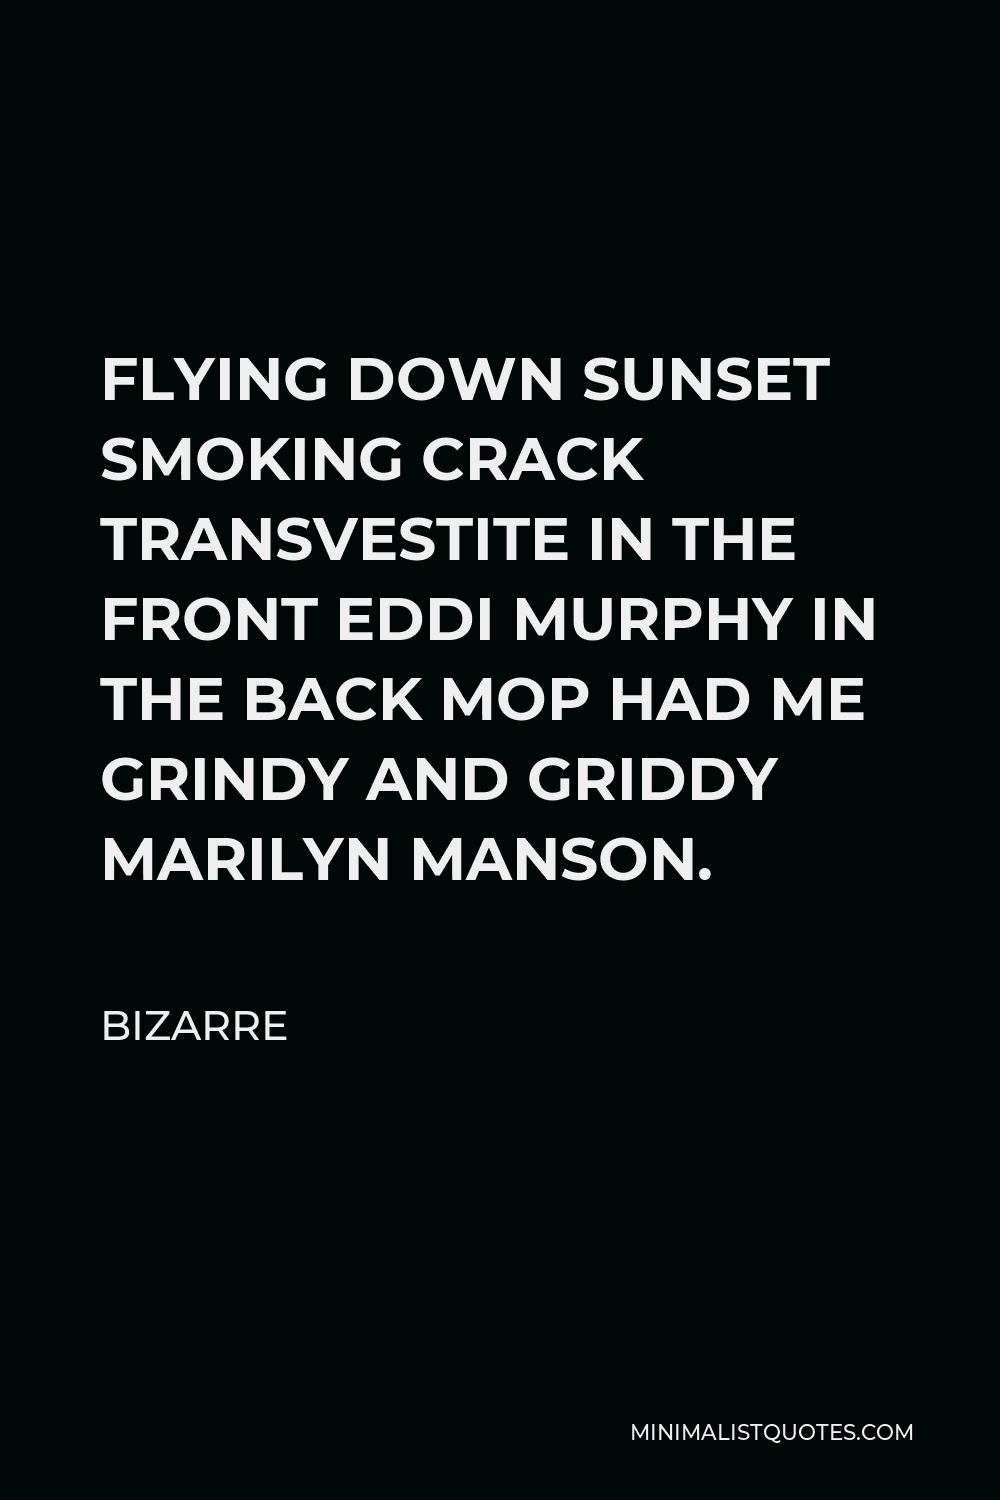 Bizarre Quote - FLYING DOWN SUNSET SMOKING CRACK TRANSVESTITE IN THE FRONT EDDI MURPHY IN THE BACK MOP HAD ME GRINDY AND GRIDDY MARILYN MANSON.